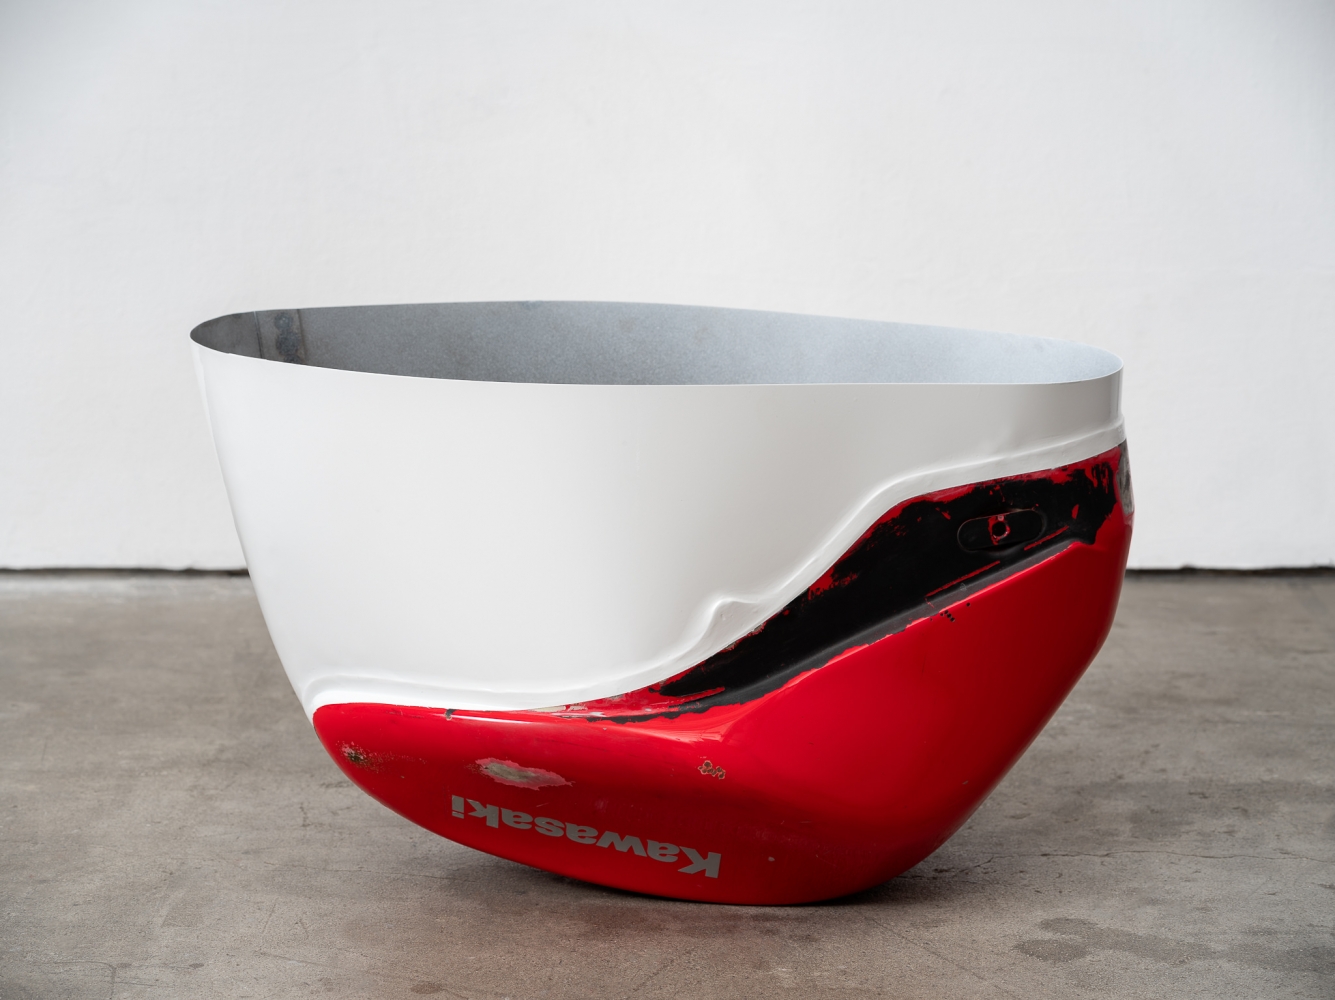 Elad Lassry

Untitled (Carrier, Red)

2019

Welded and painted steel

24 1/2 x 13 1/4 x 15 inches (62.2 x 33.7 x 38.1 cm)

Unique

EL 515

$35,000

&amp;nbsp;

INQUIRE